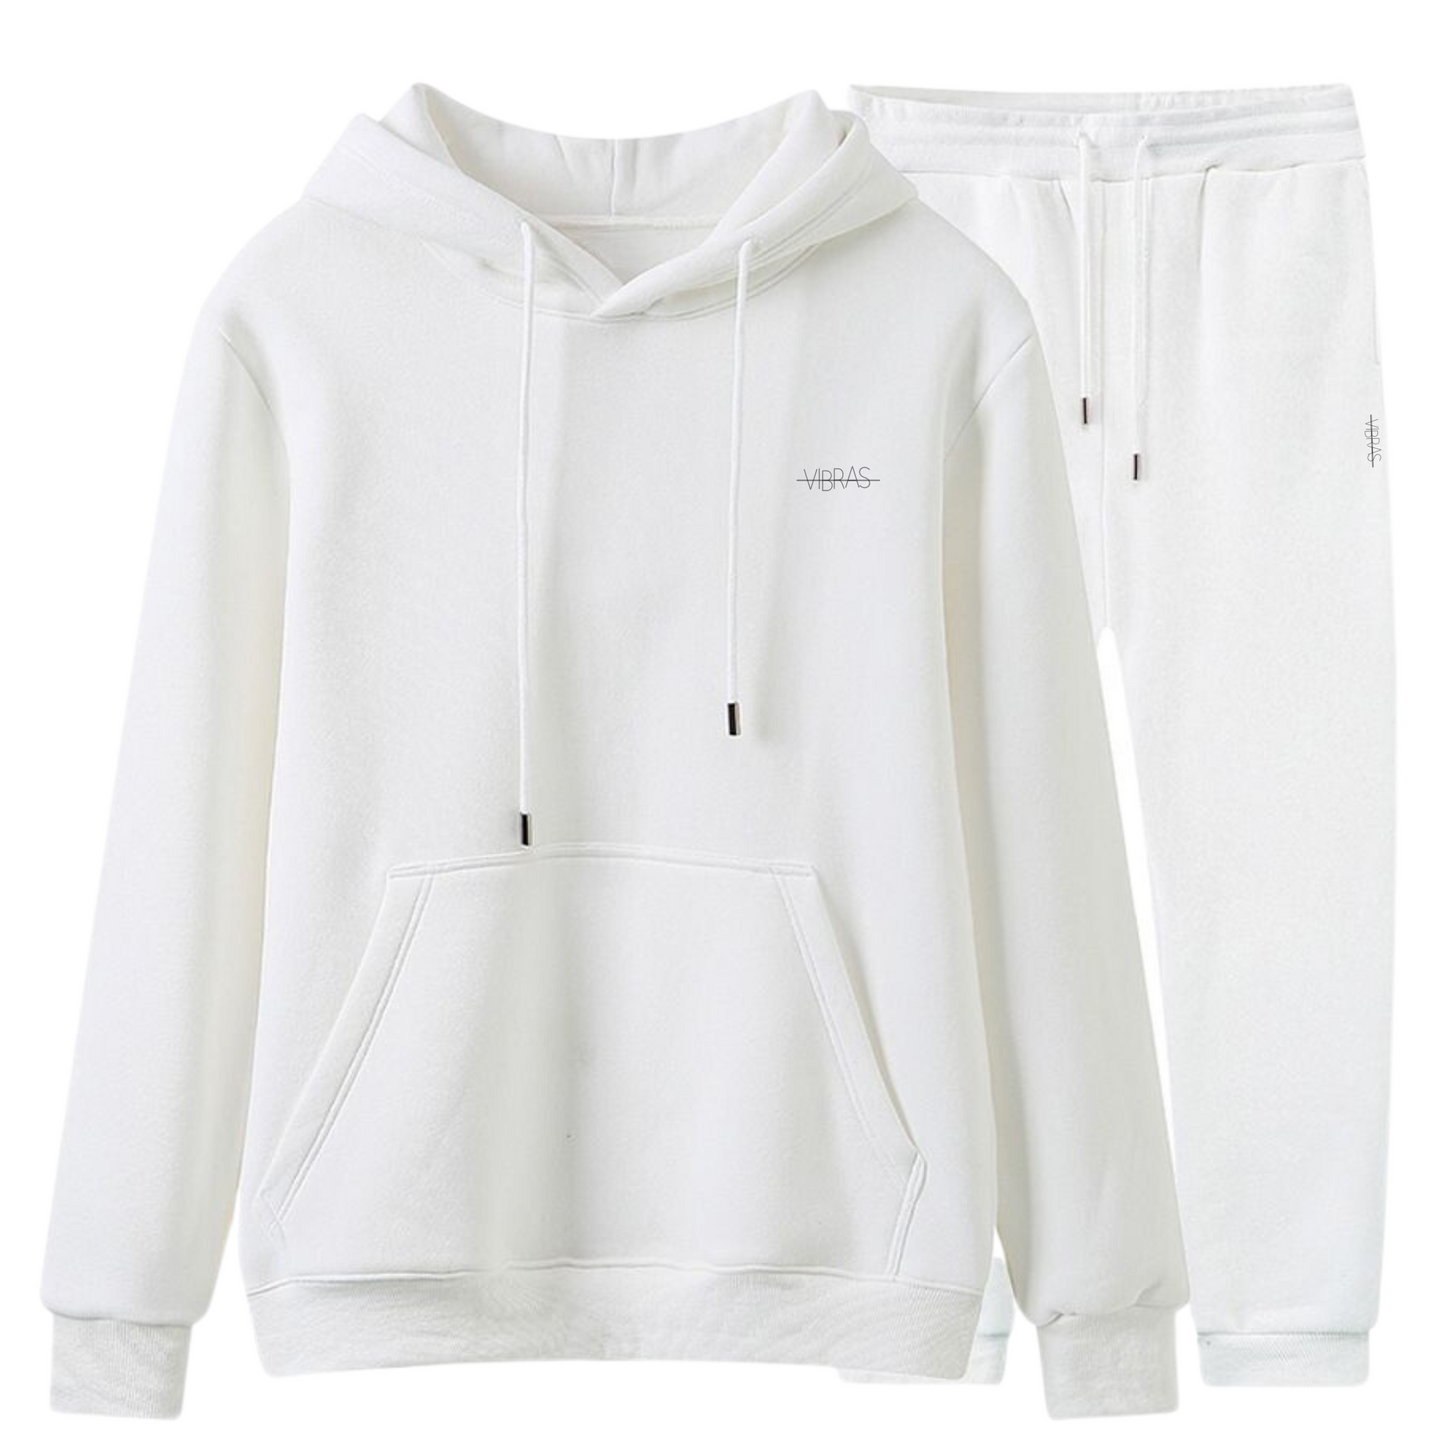 Photo of a cozy and unisex fleece tracksuit set in cotton white.